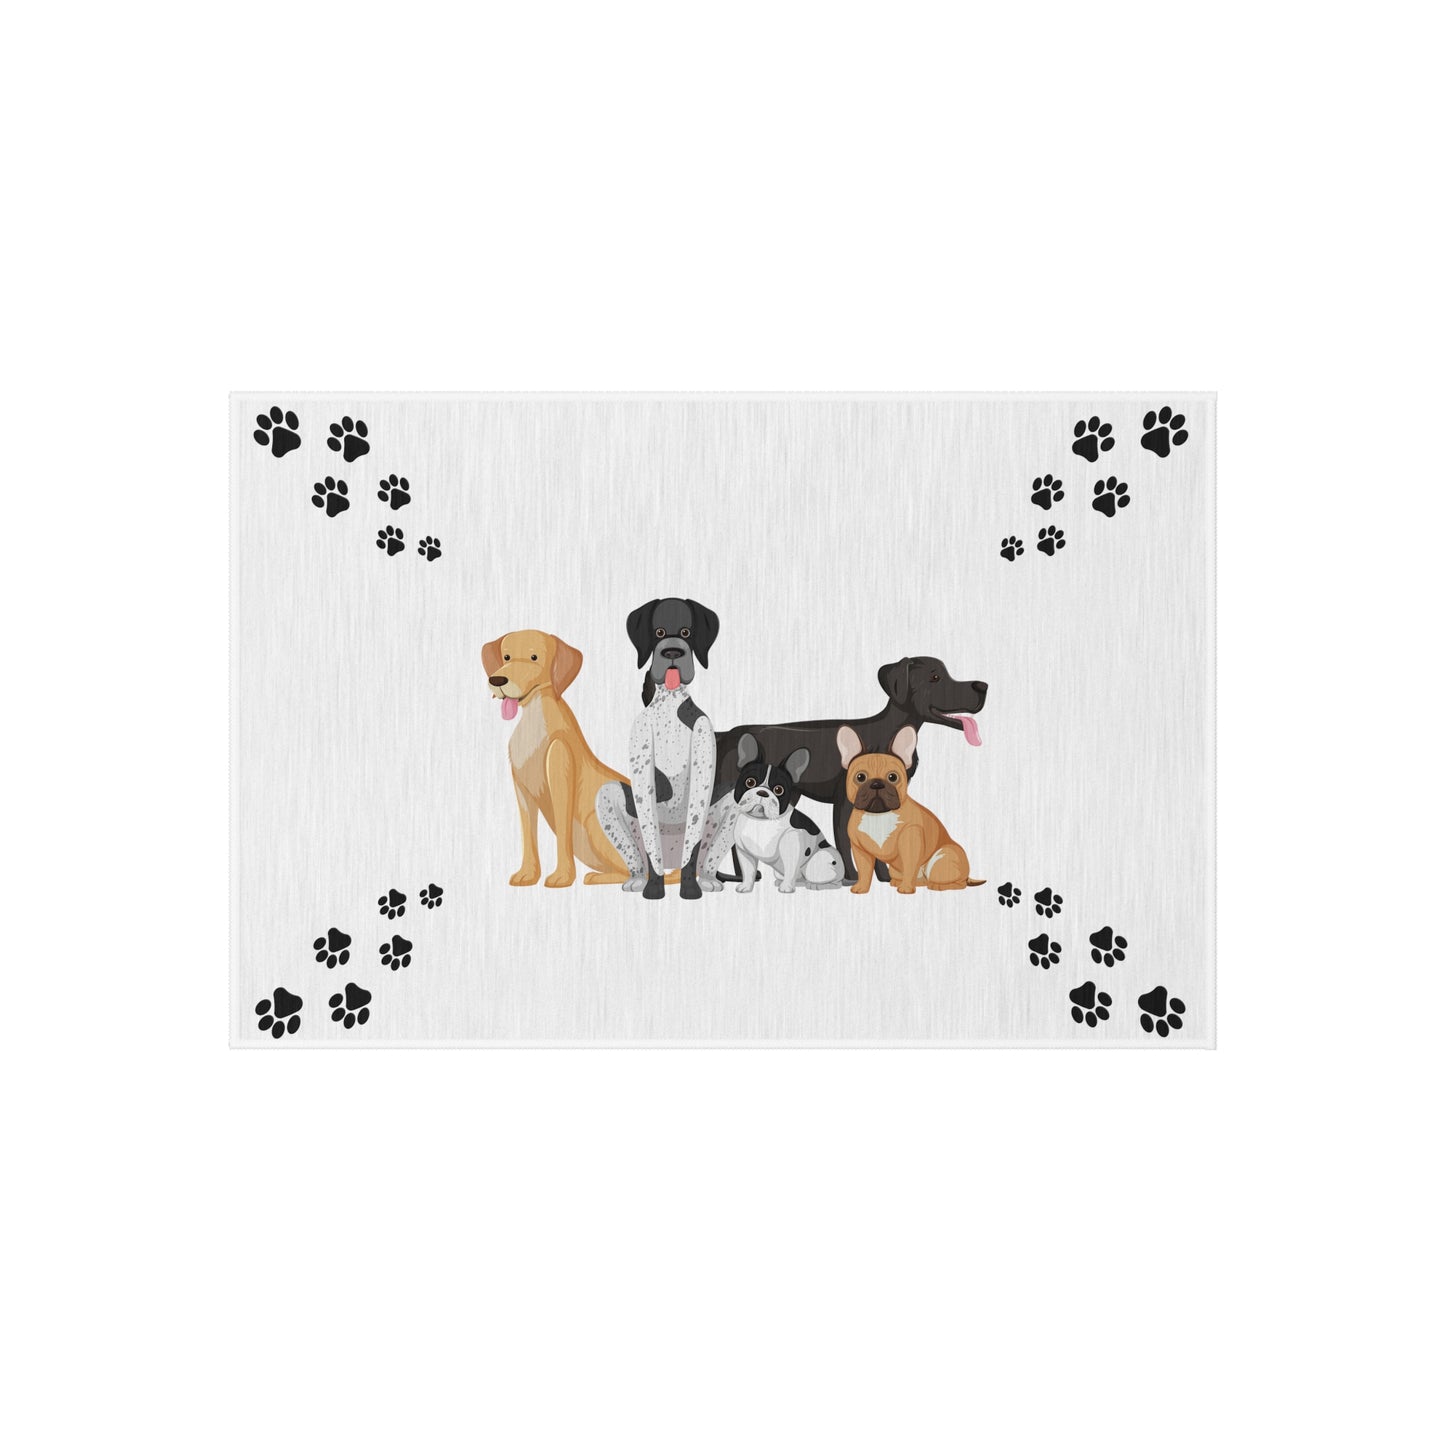 Welcome Mat - Dogs and Paws Welcome Rug, Non-Slip Backing